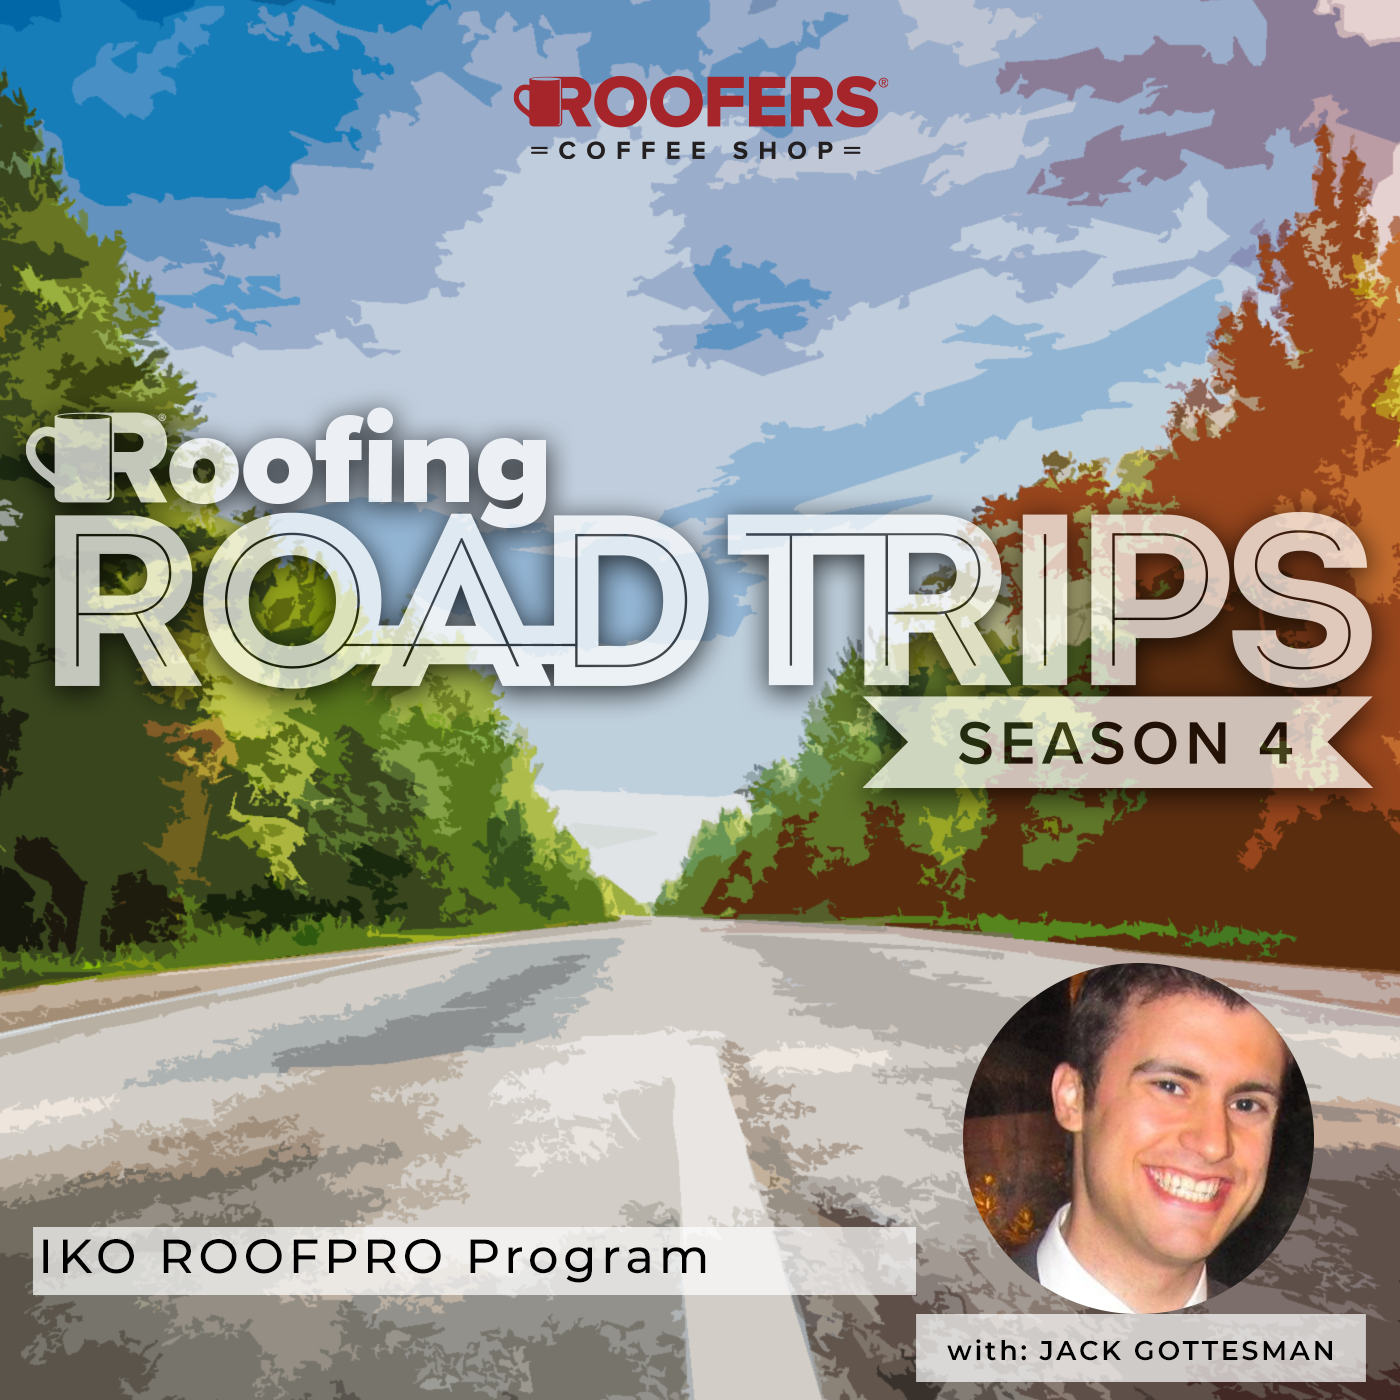 Jack Gottesman - Taking pros to the next level with ROOFPRO